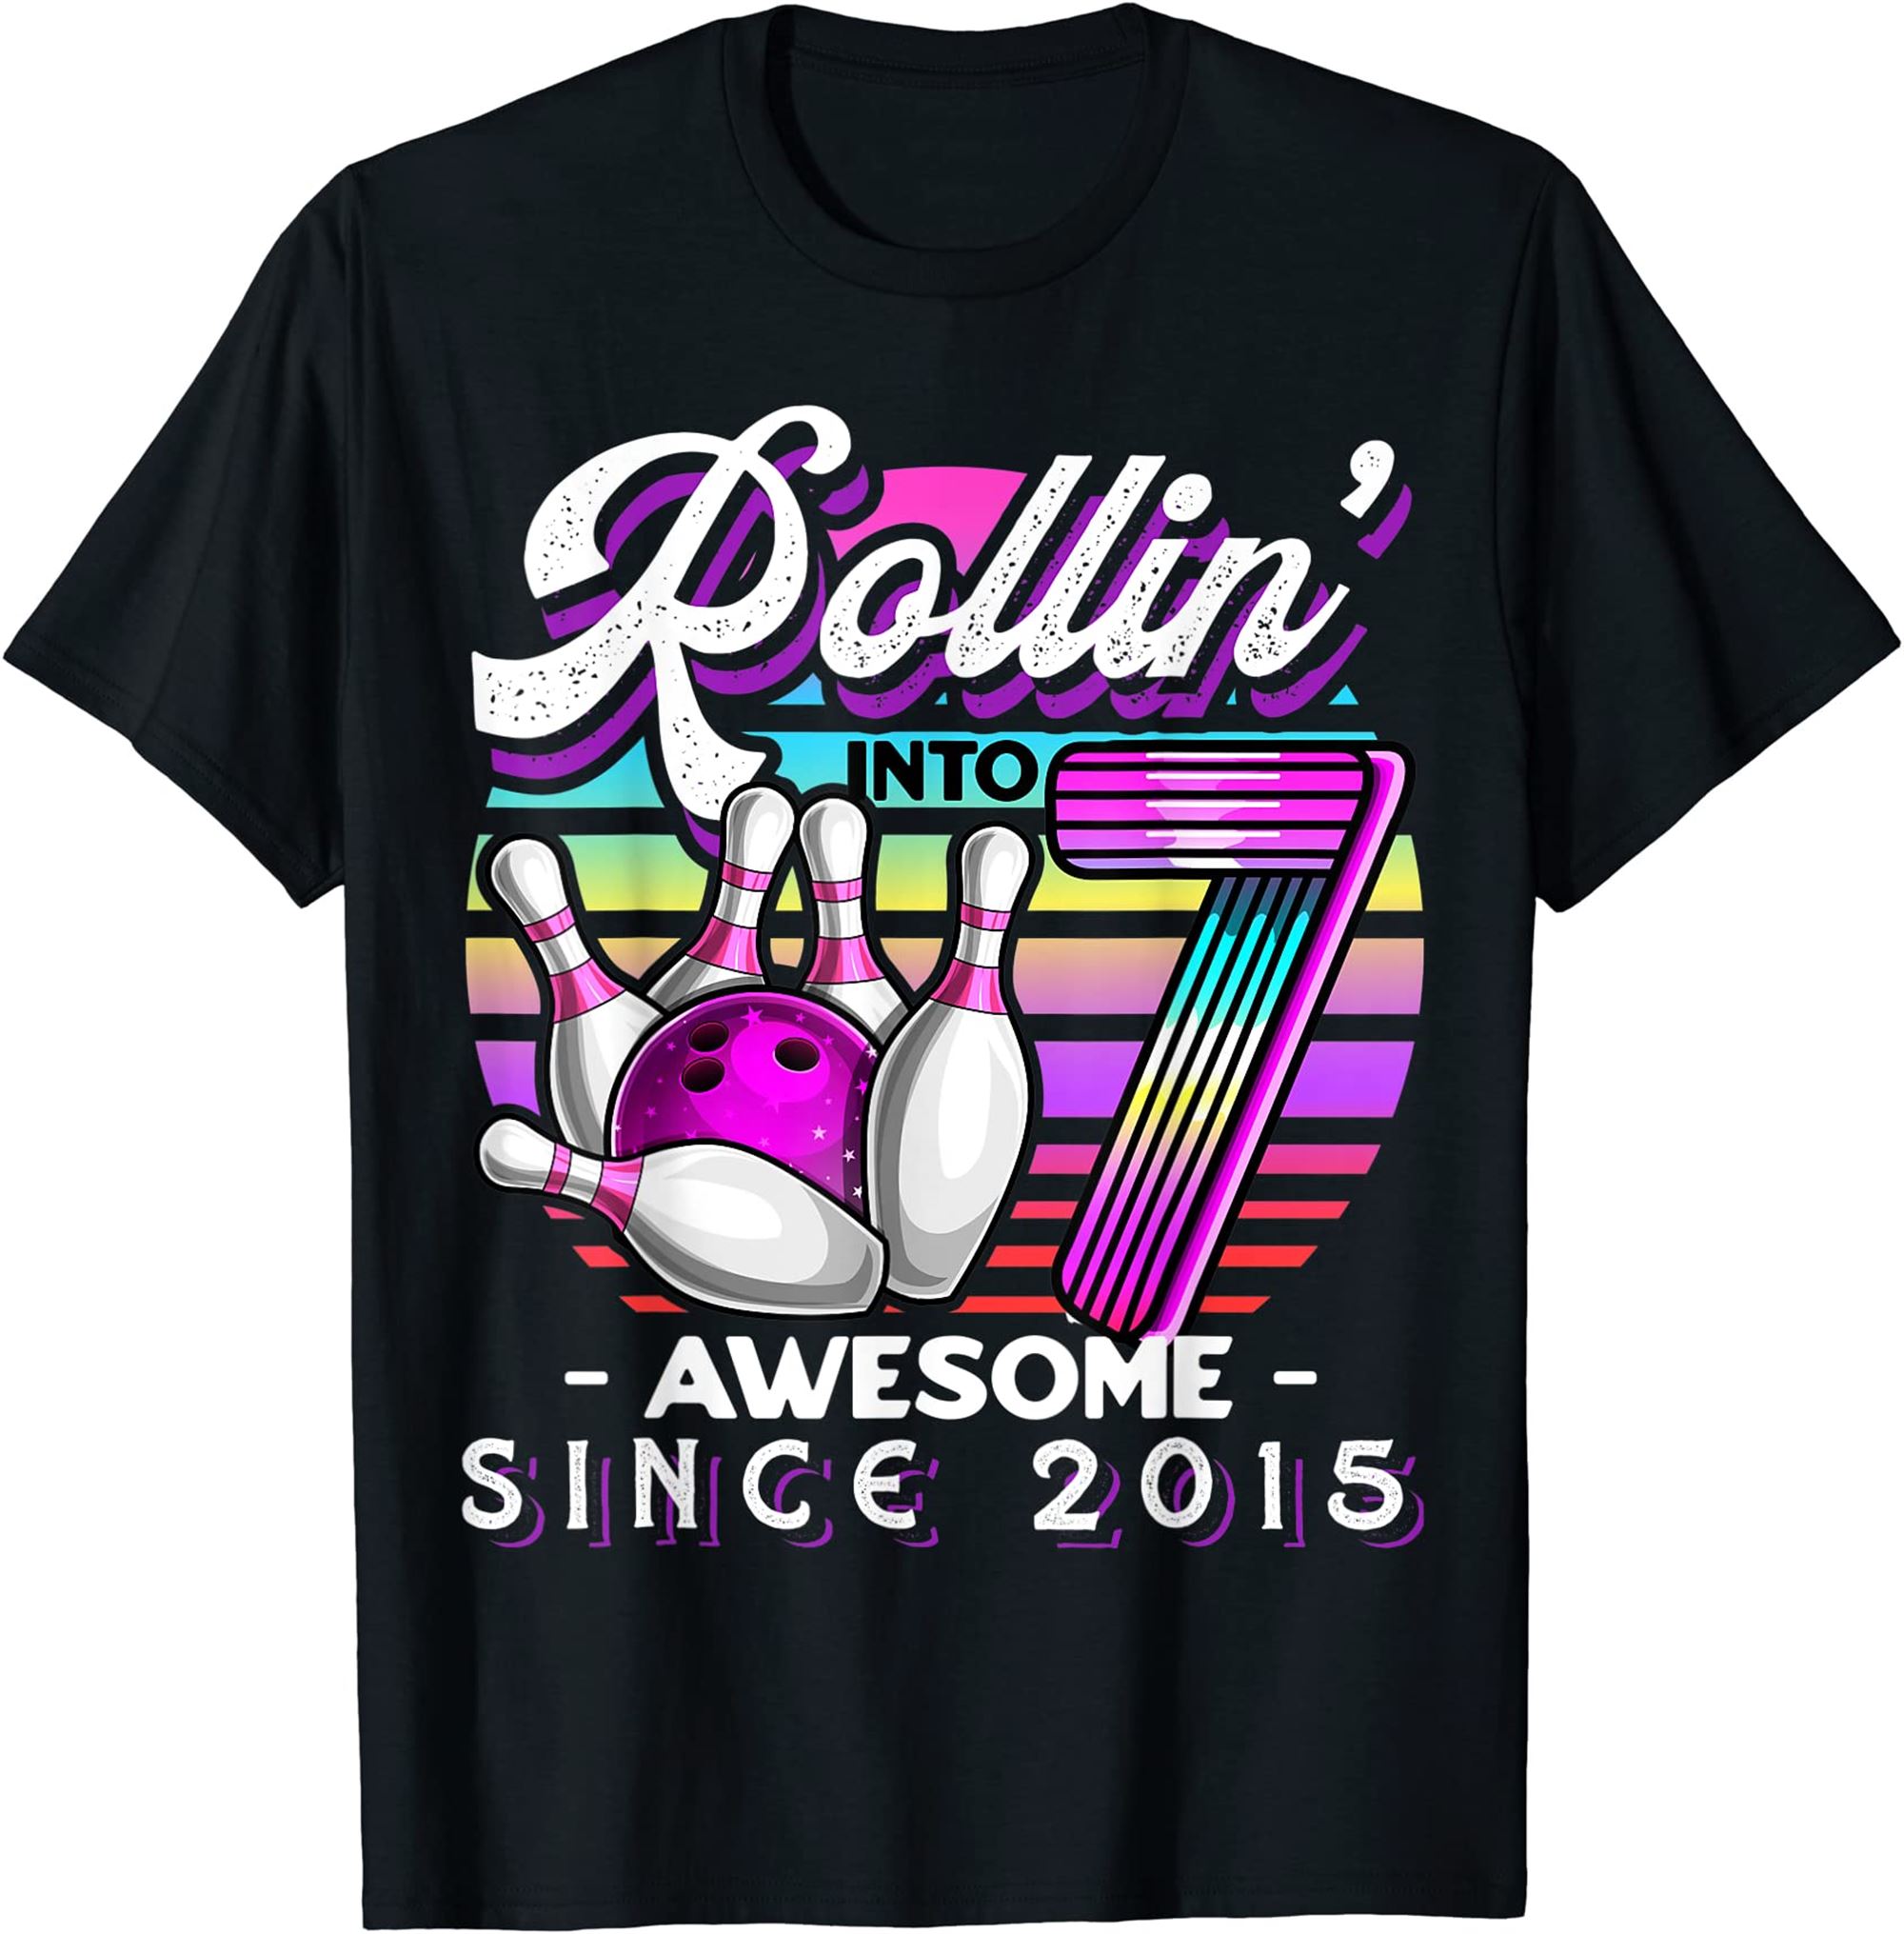 Rollin Into 7 Awesome 2015 Retro Bowling 7th Birthday Girls T-shirt Full Size Up To 5xl